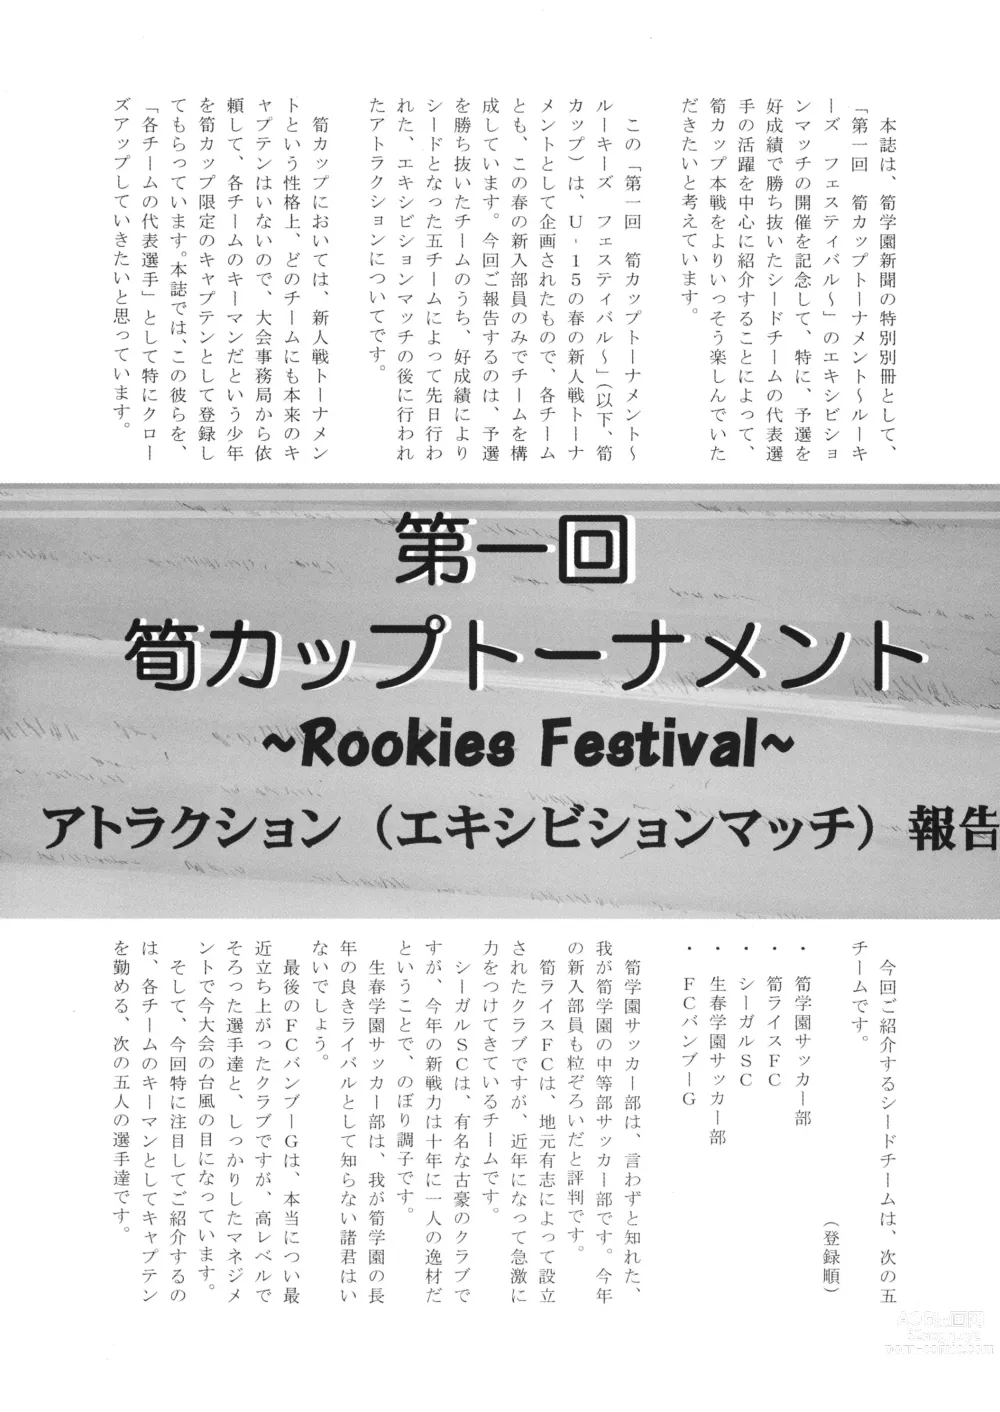 Page 3 of doujinshi Rookies Festival (decensored)